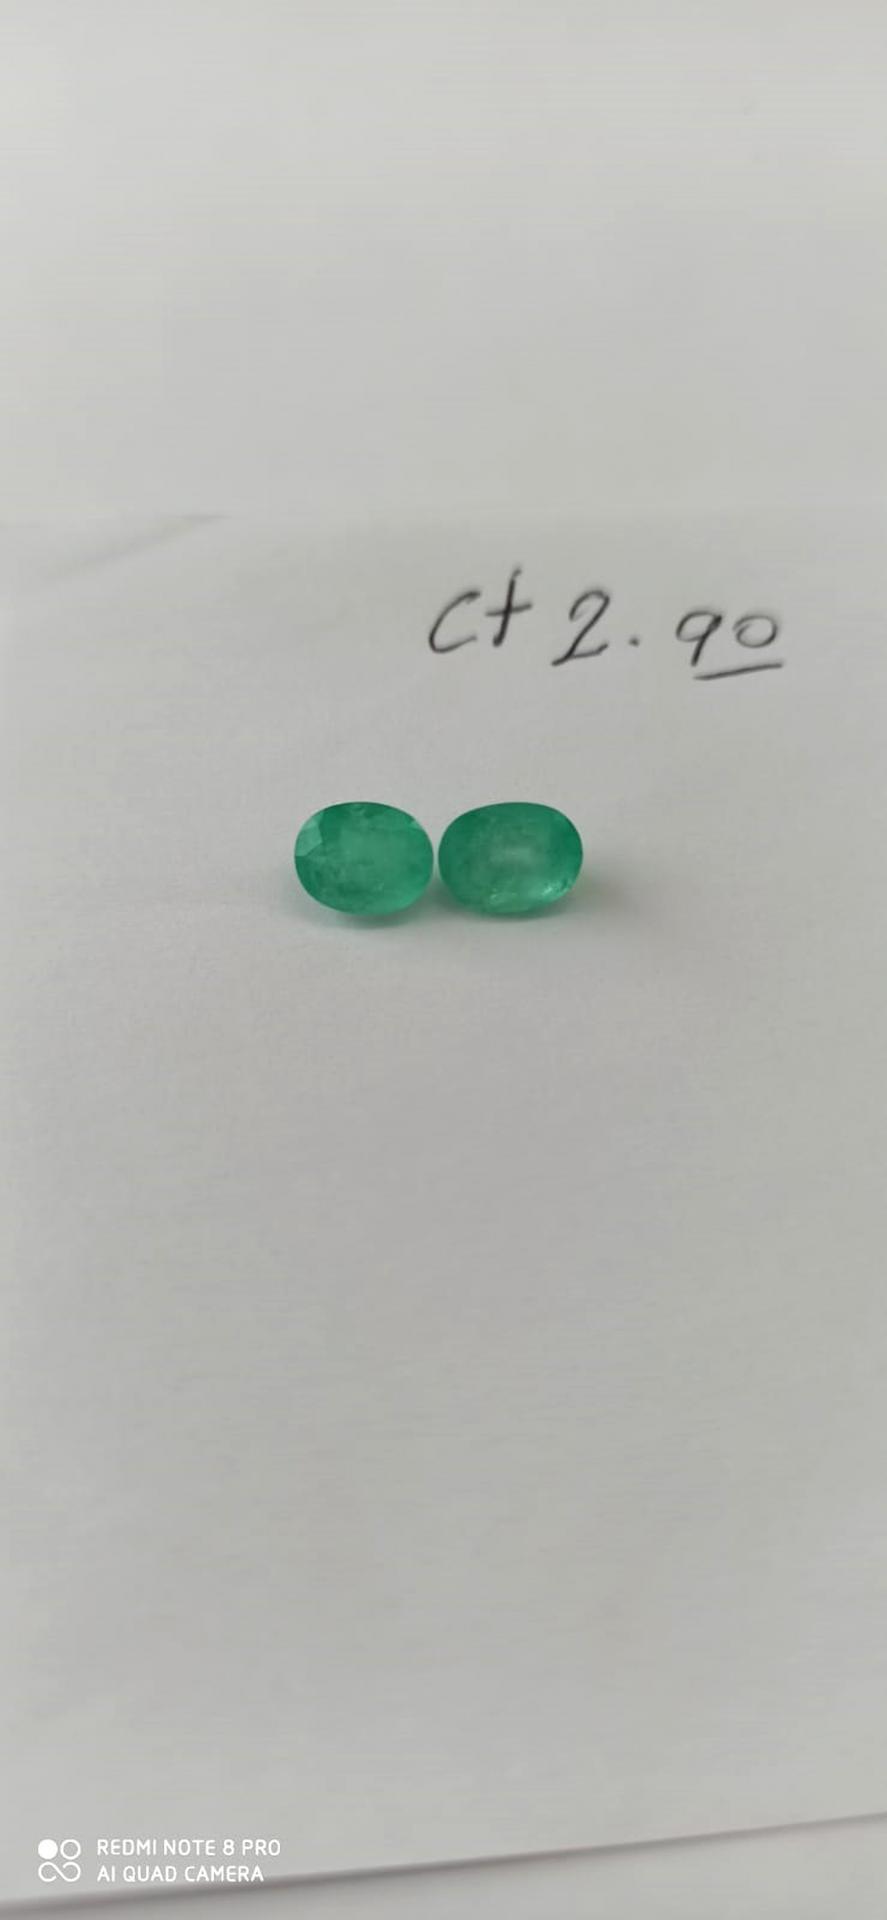 2.90ct Colombian Emerald Pair